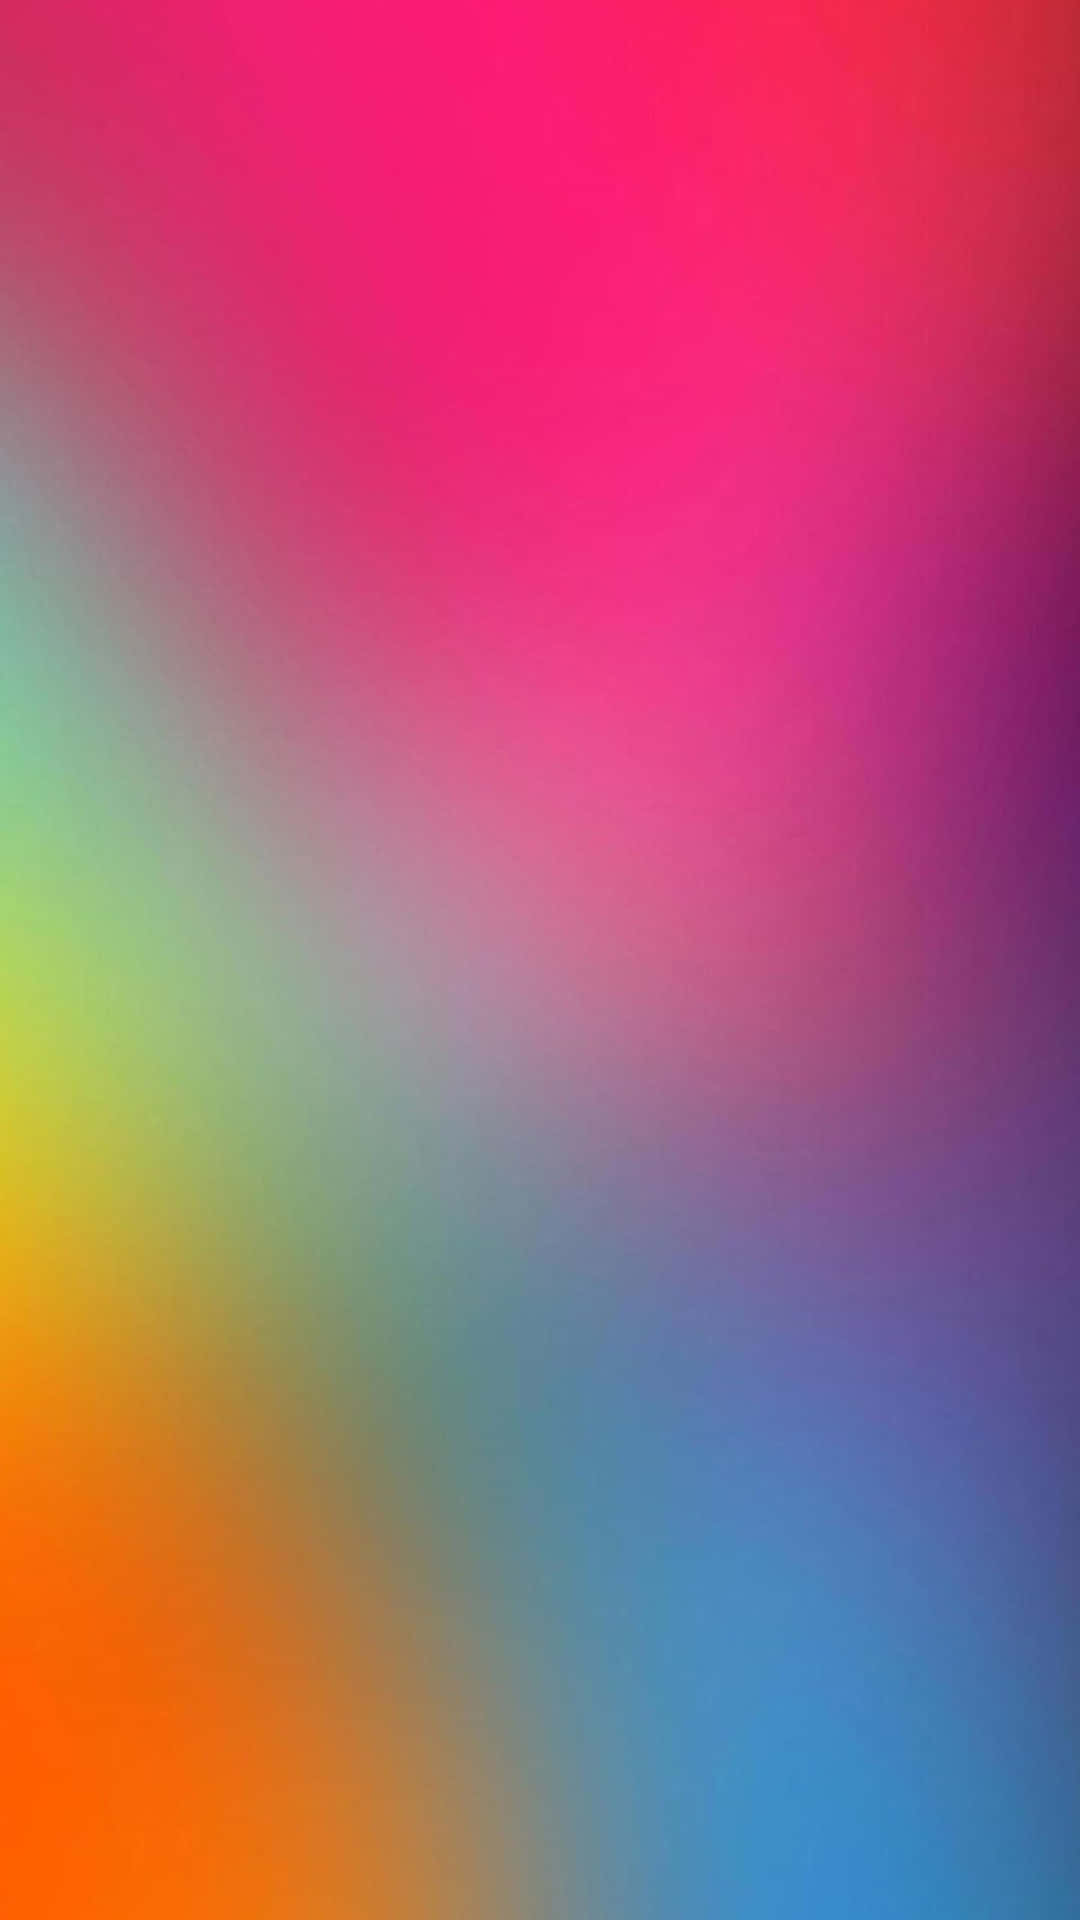 A Colorful Blurred Background With A Rainbow Of Colors Background